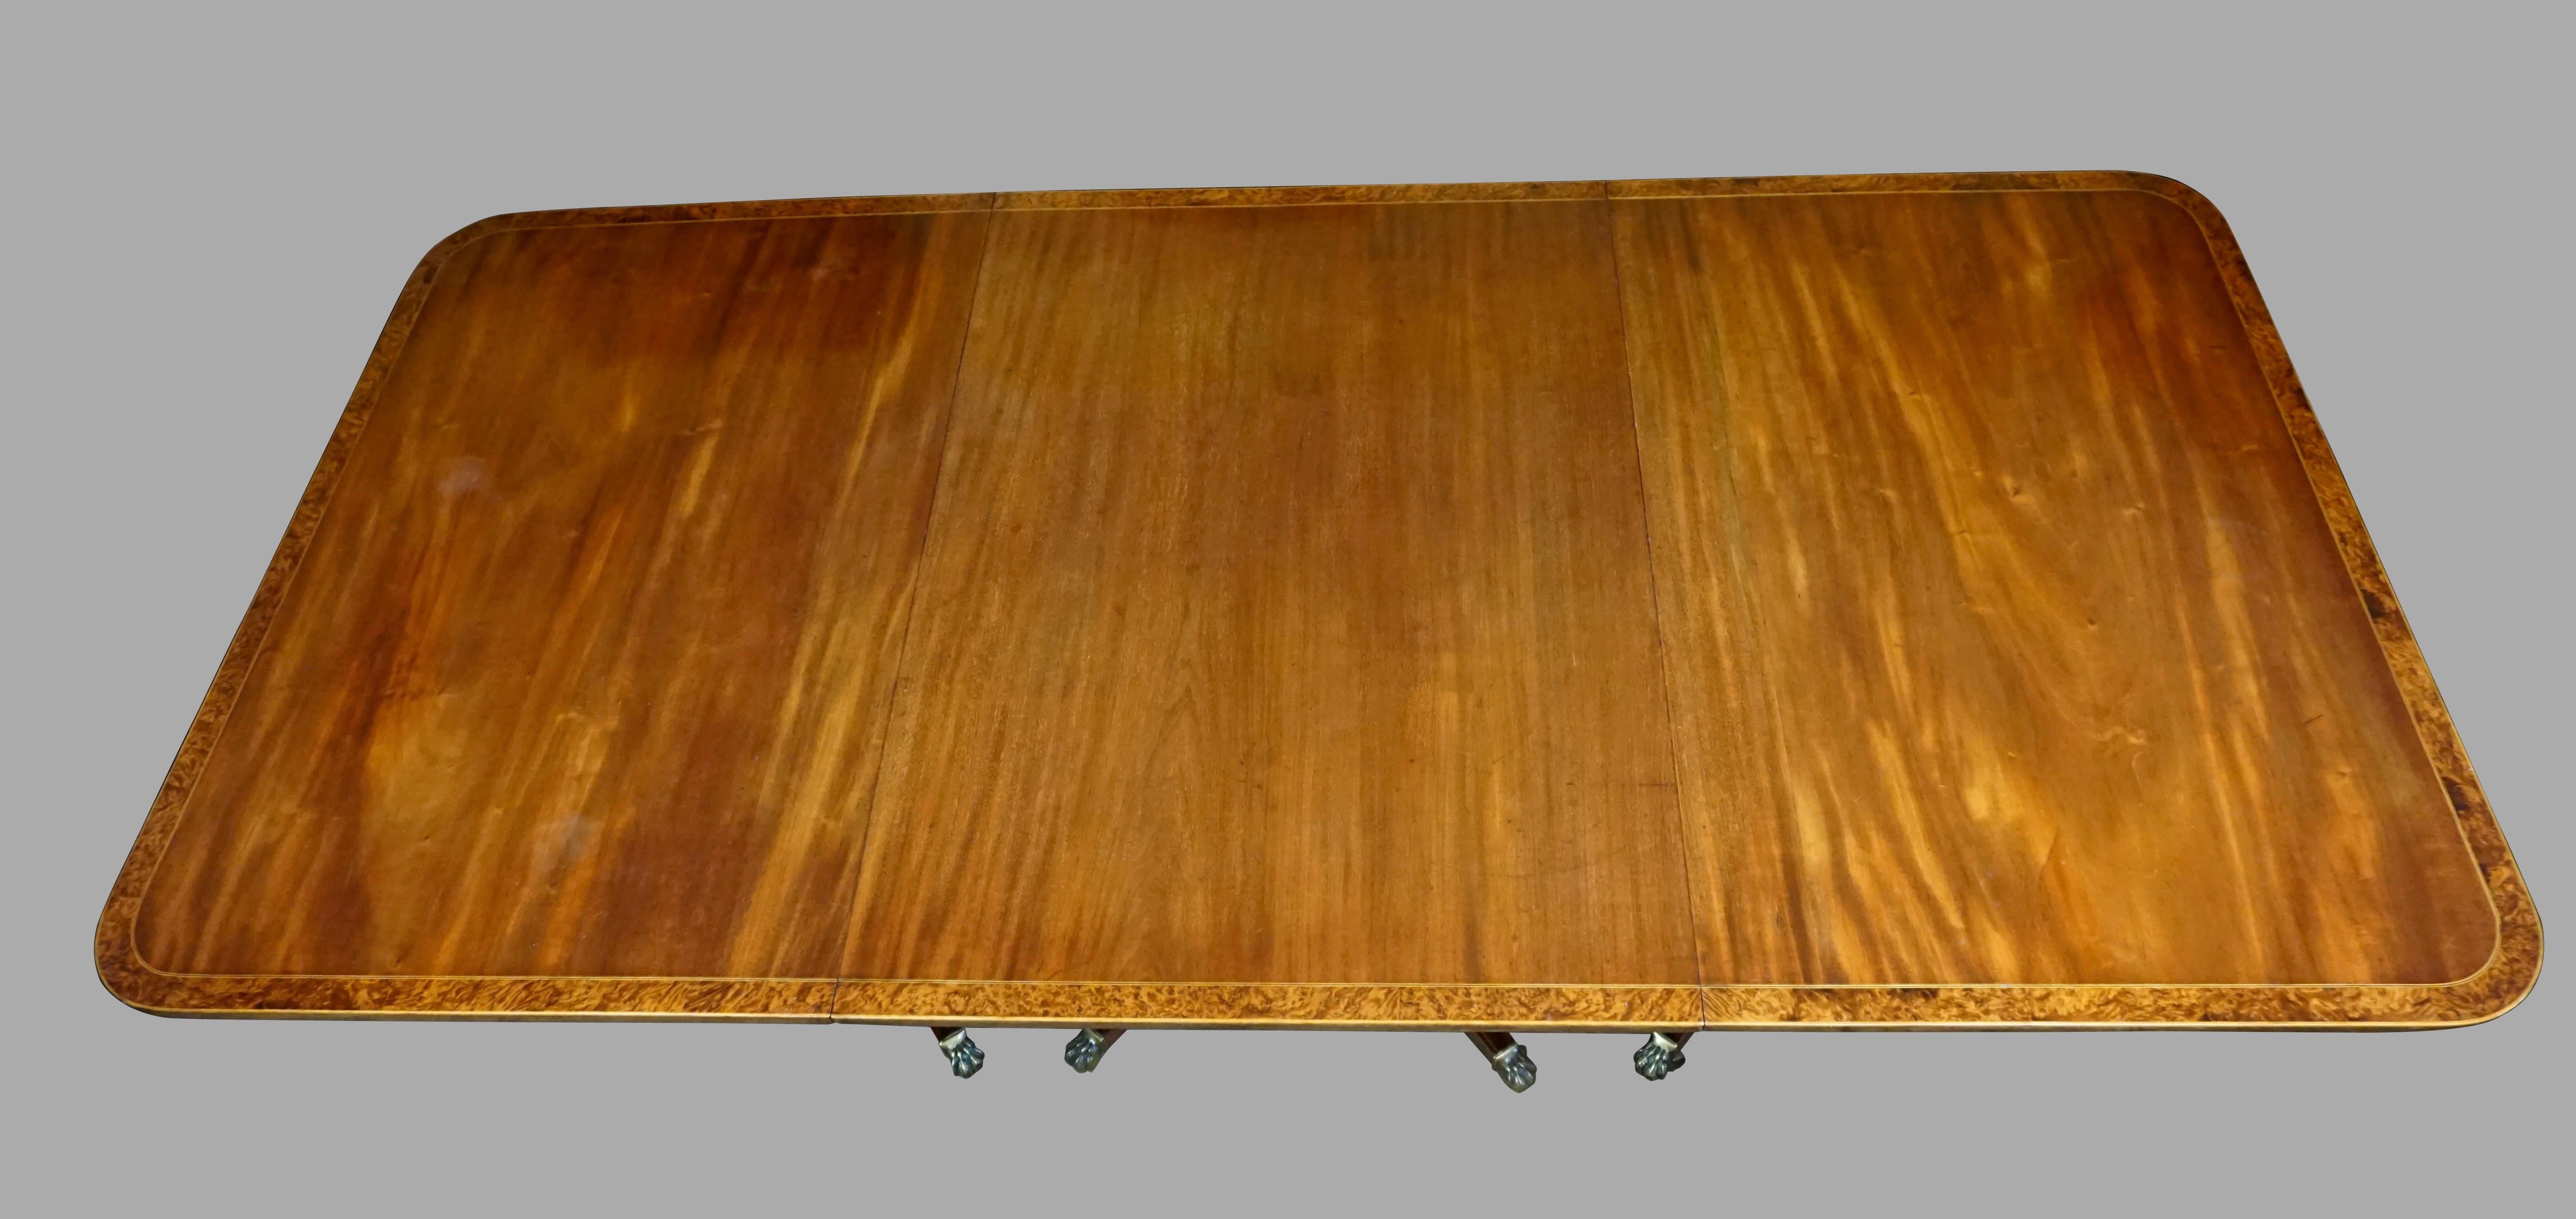 English Georgian Style Burl Elm Crossbanded Mahogany 3 Pedestal Dining Table with Leaves For Sale